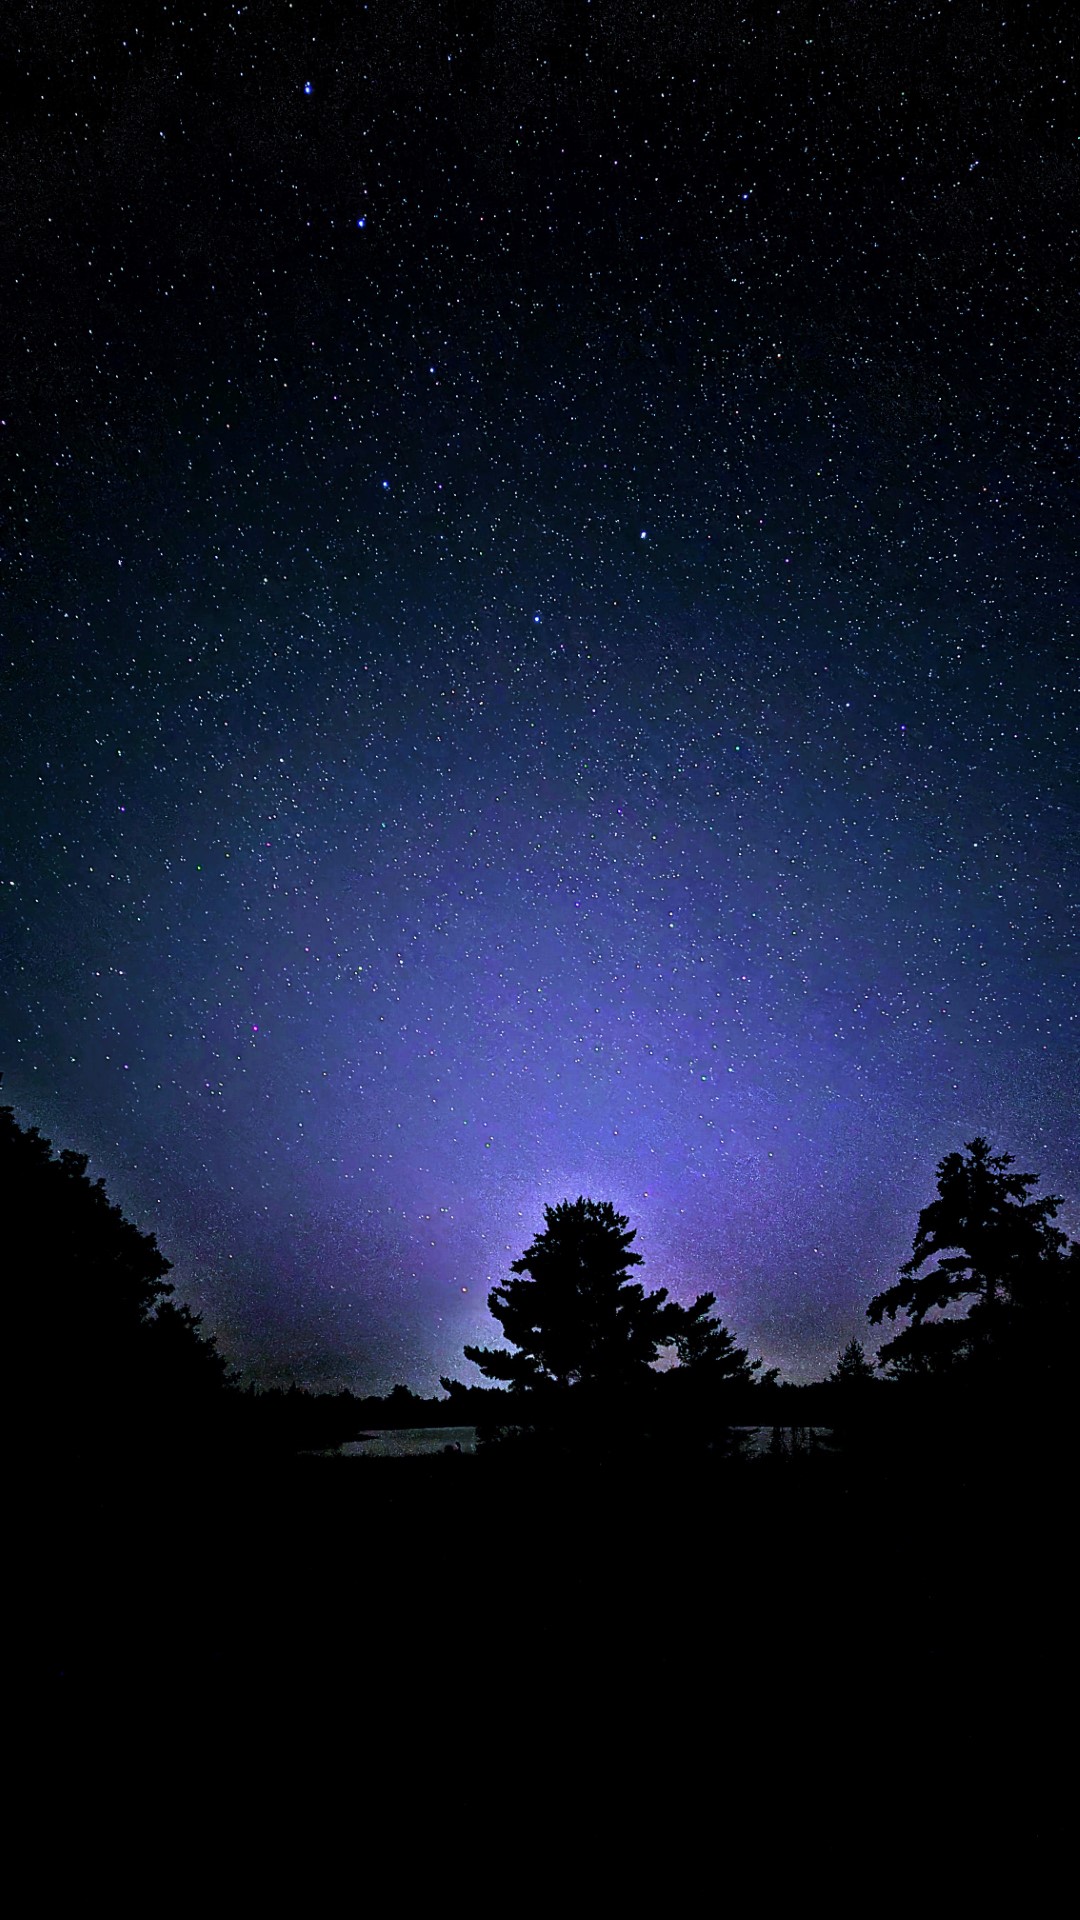 Starry night at Torrance Barrens